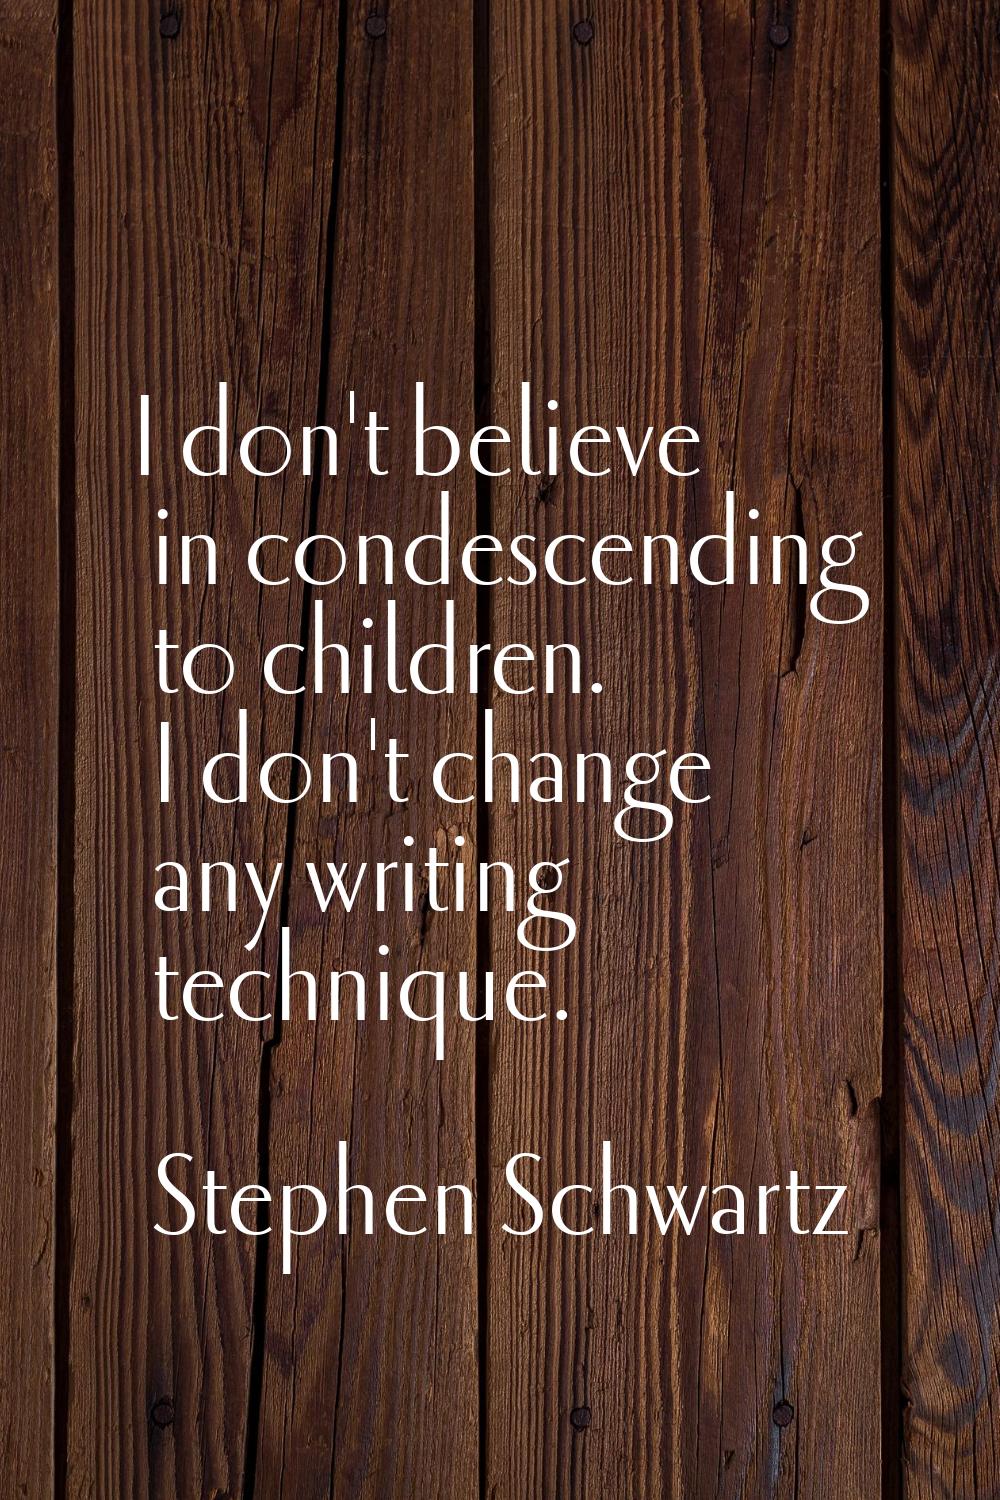 I don't believe in condescending to children. I don't change any writing technique.